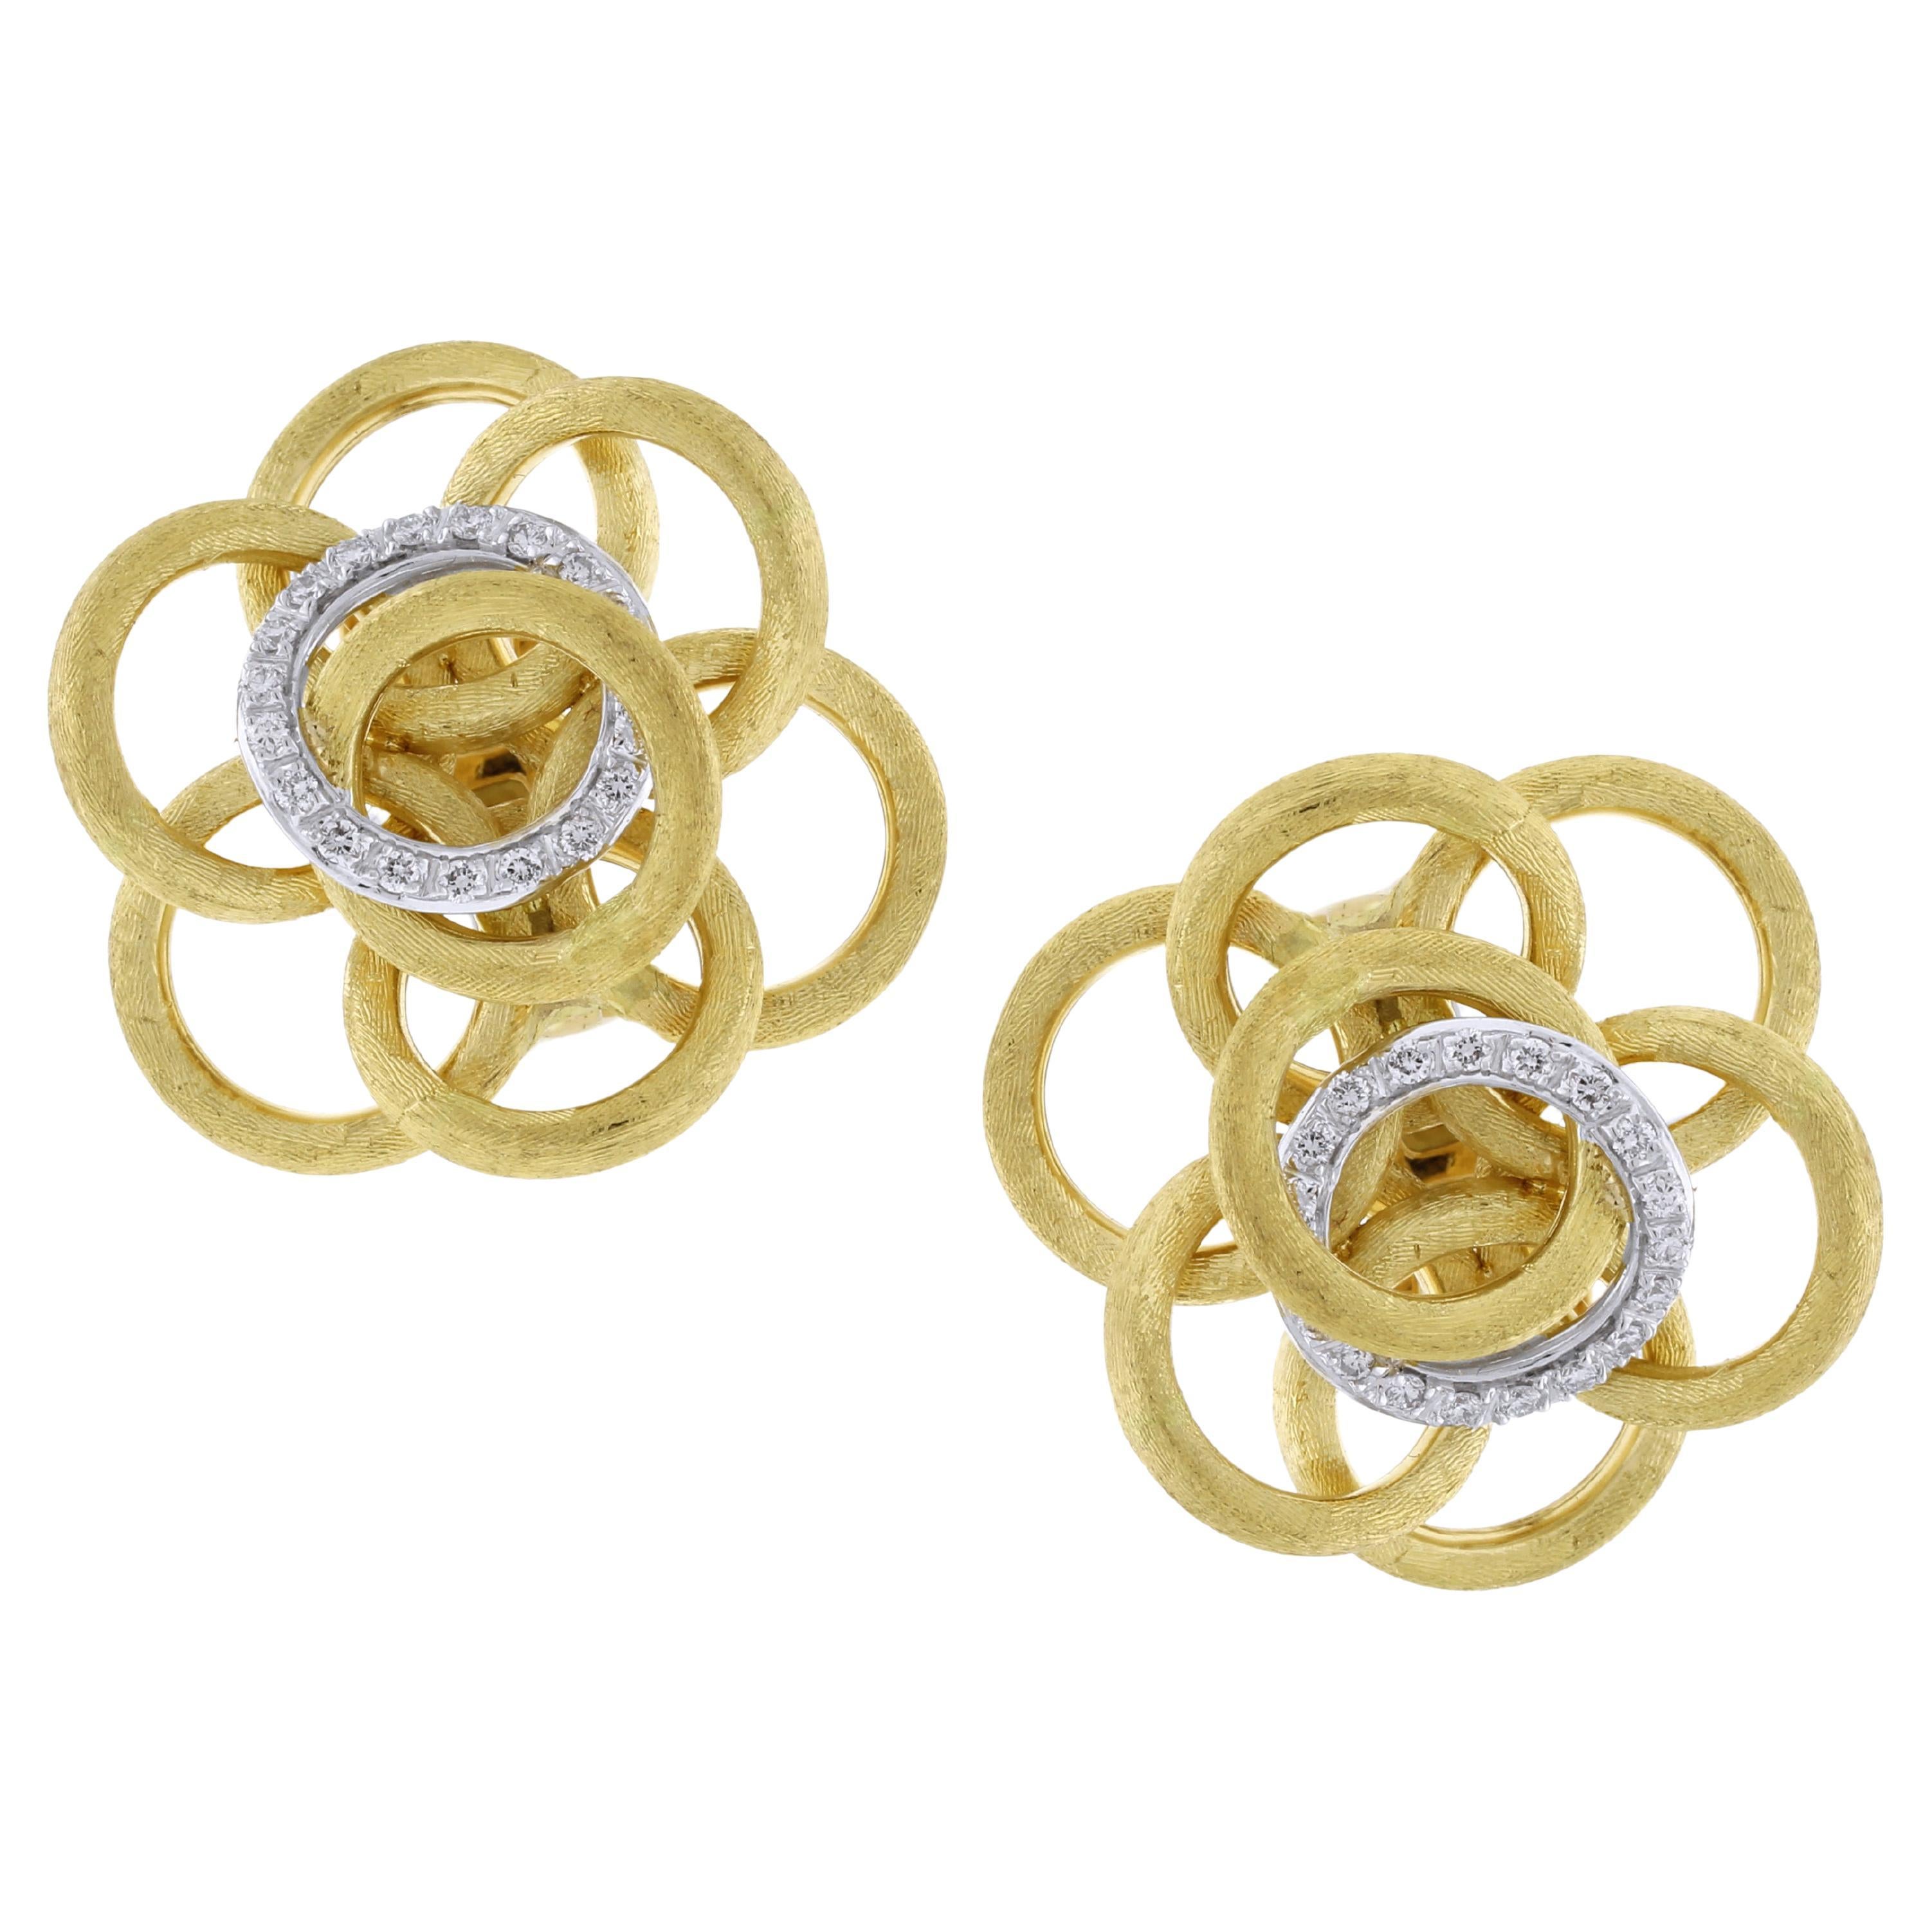 Marco Bicego Jaipur Gold and Diamond Earrings 